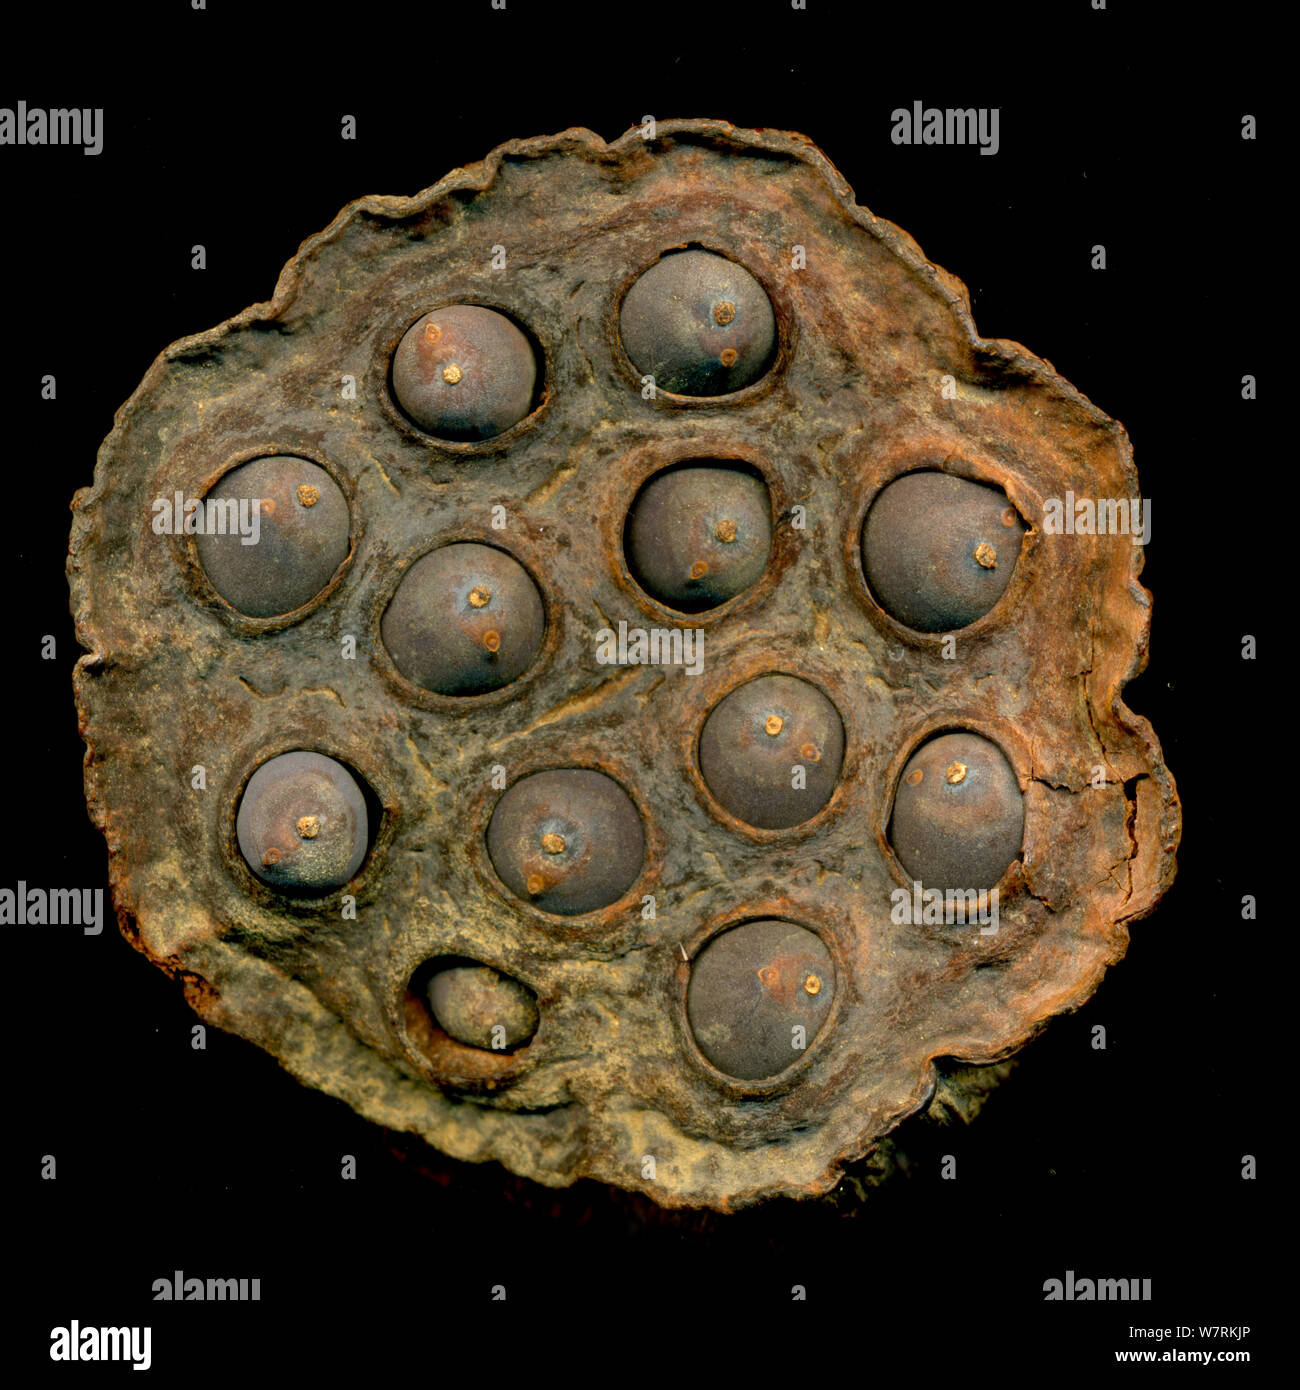 Seed head of an Indian lotus (Nelumbo nucifera), showing seeds, scanned on a flatbed scanner, England, UK. Stock Photo